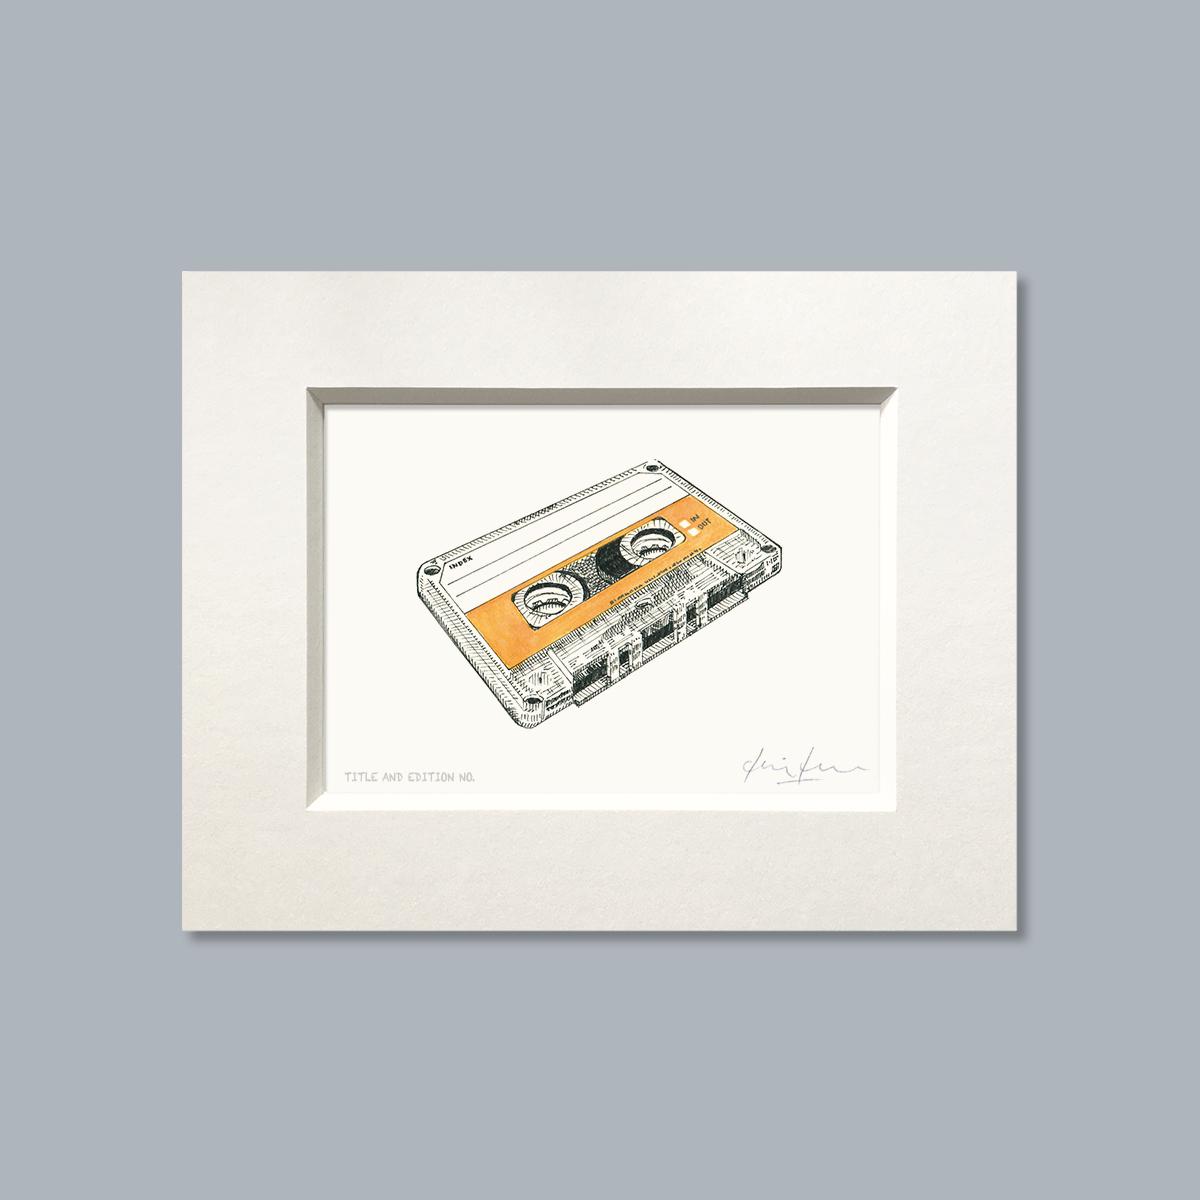 Limited edition print from pen, ink and watercolour sketch of a cassette tape in a white mount